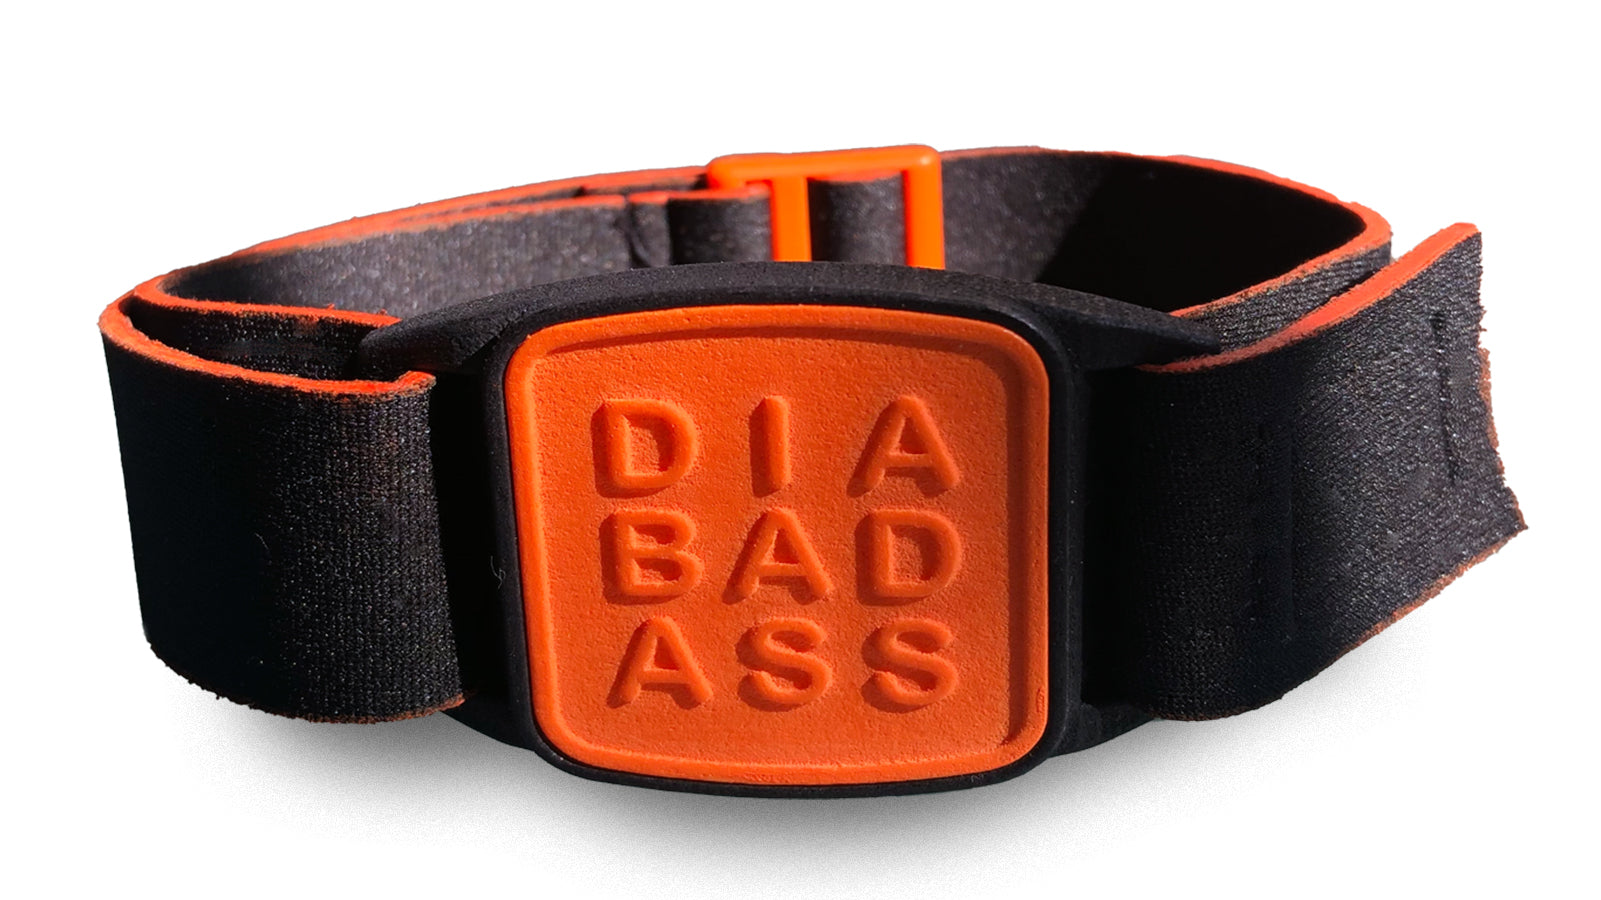 Libreband armband for Freestyle Libre 2. Orange with Diabadass cover.